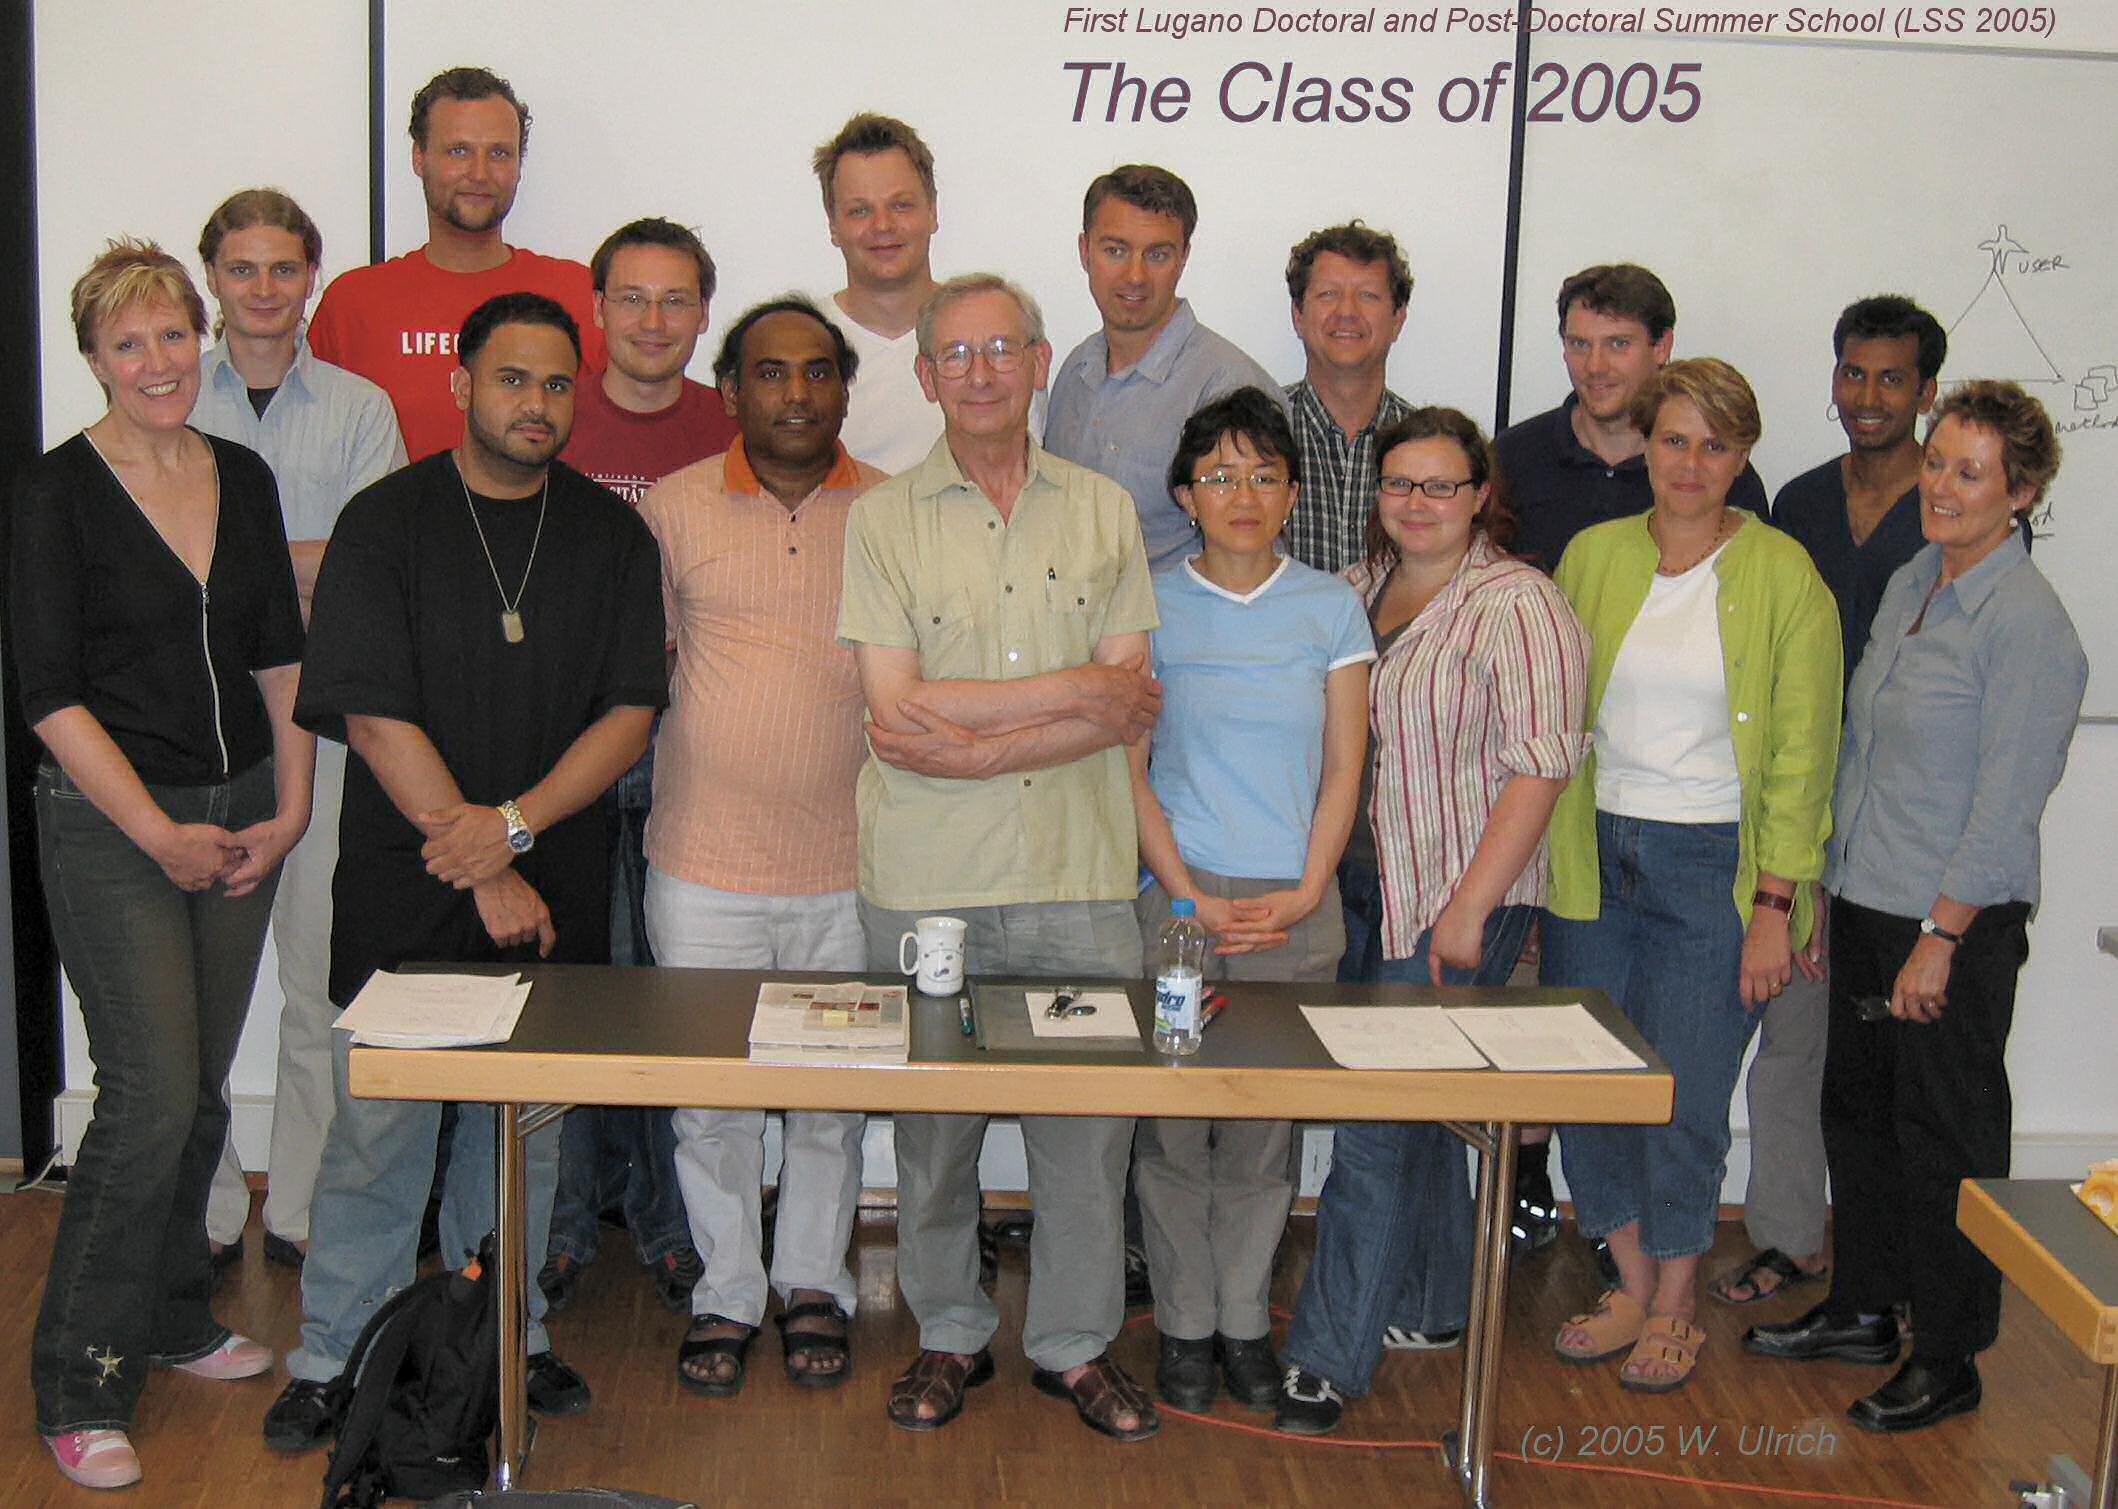 The class of 2005